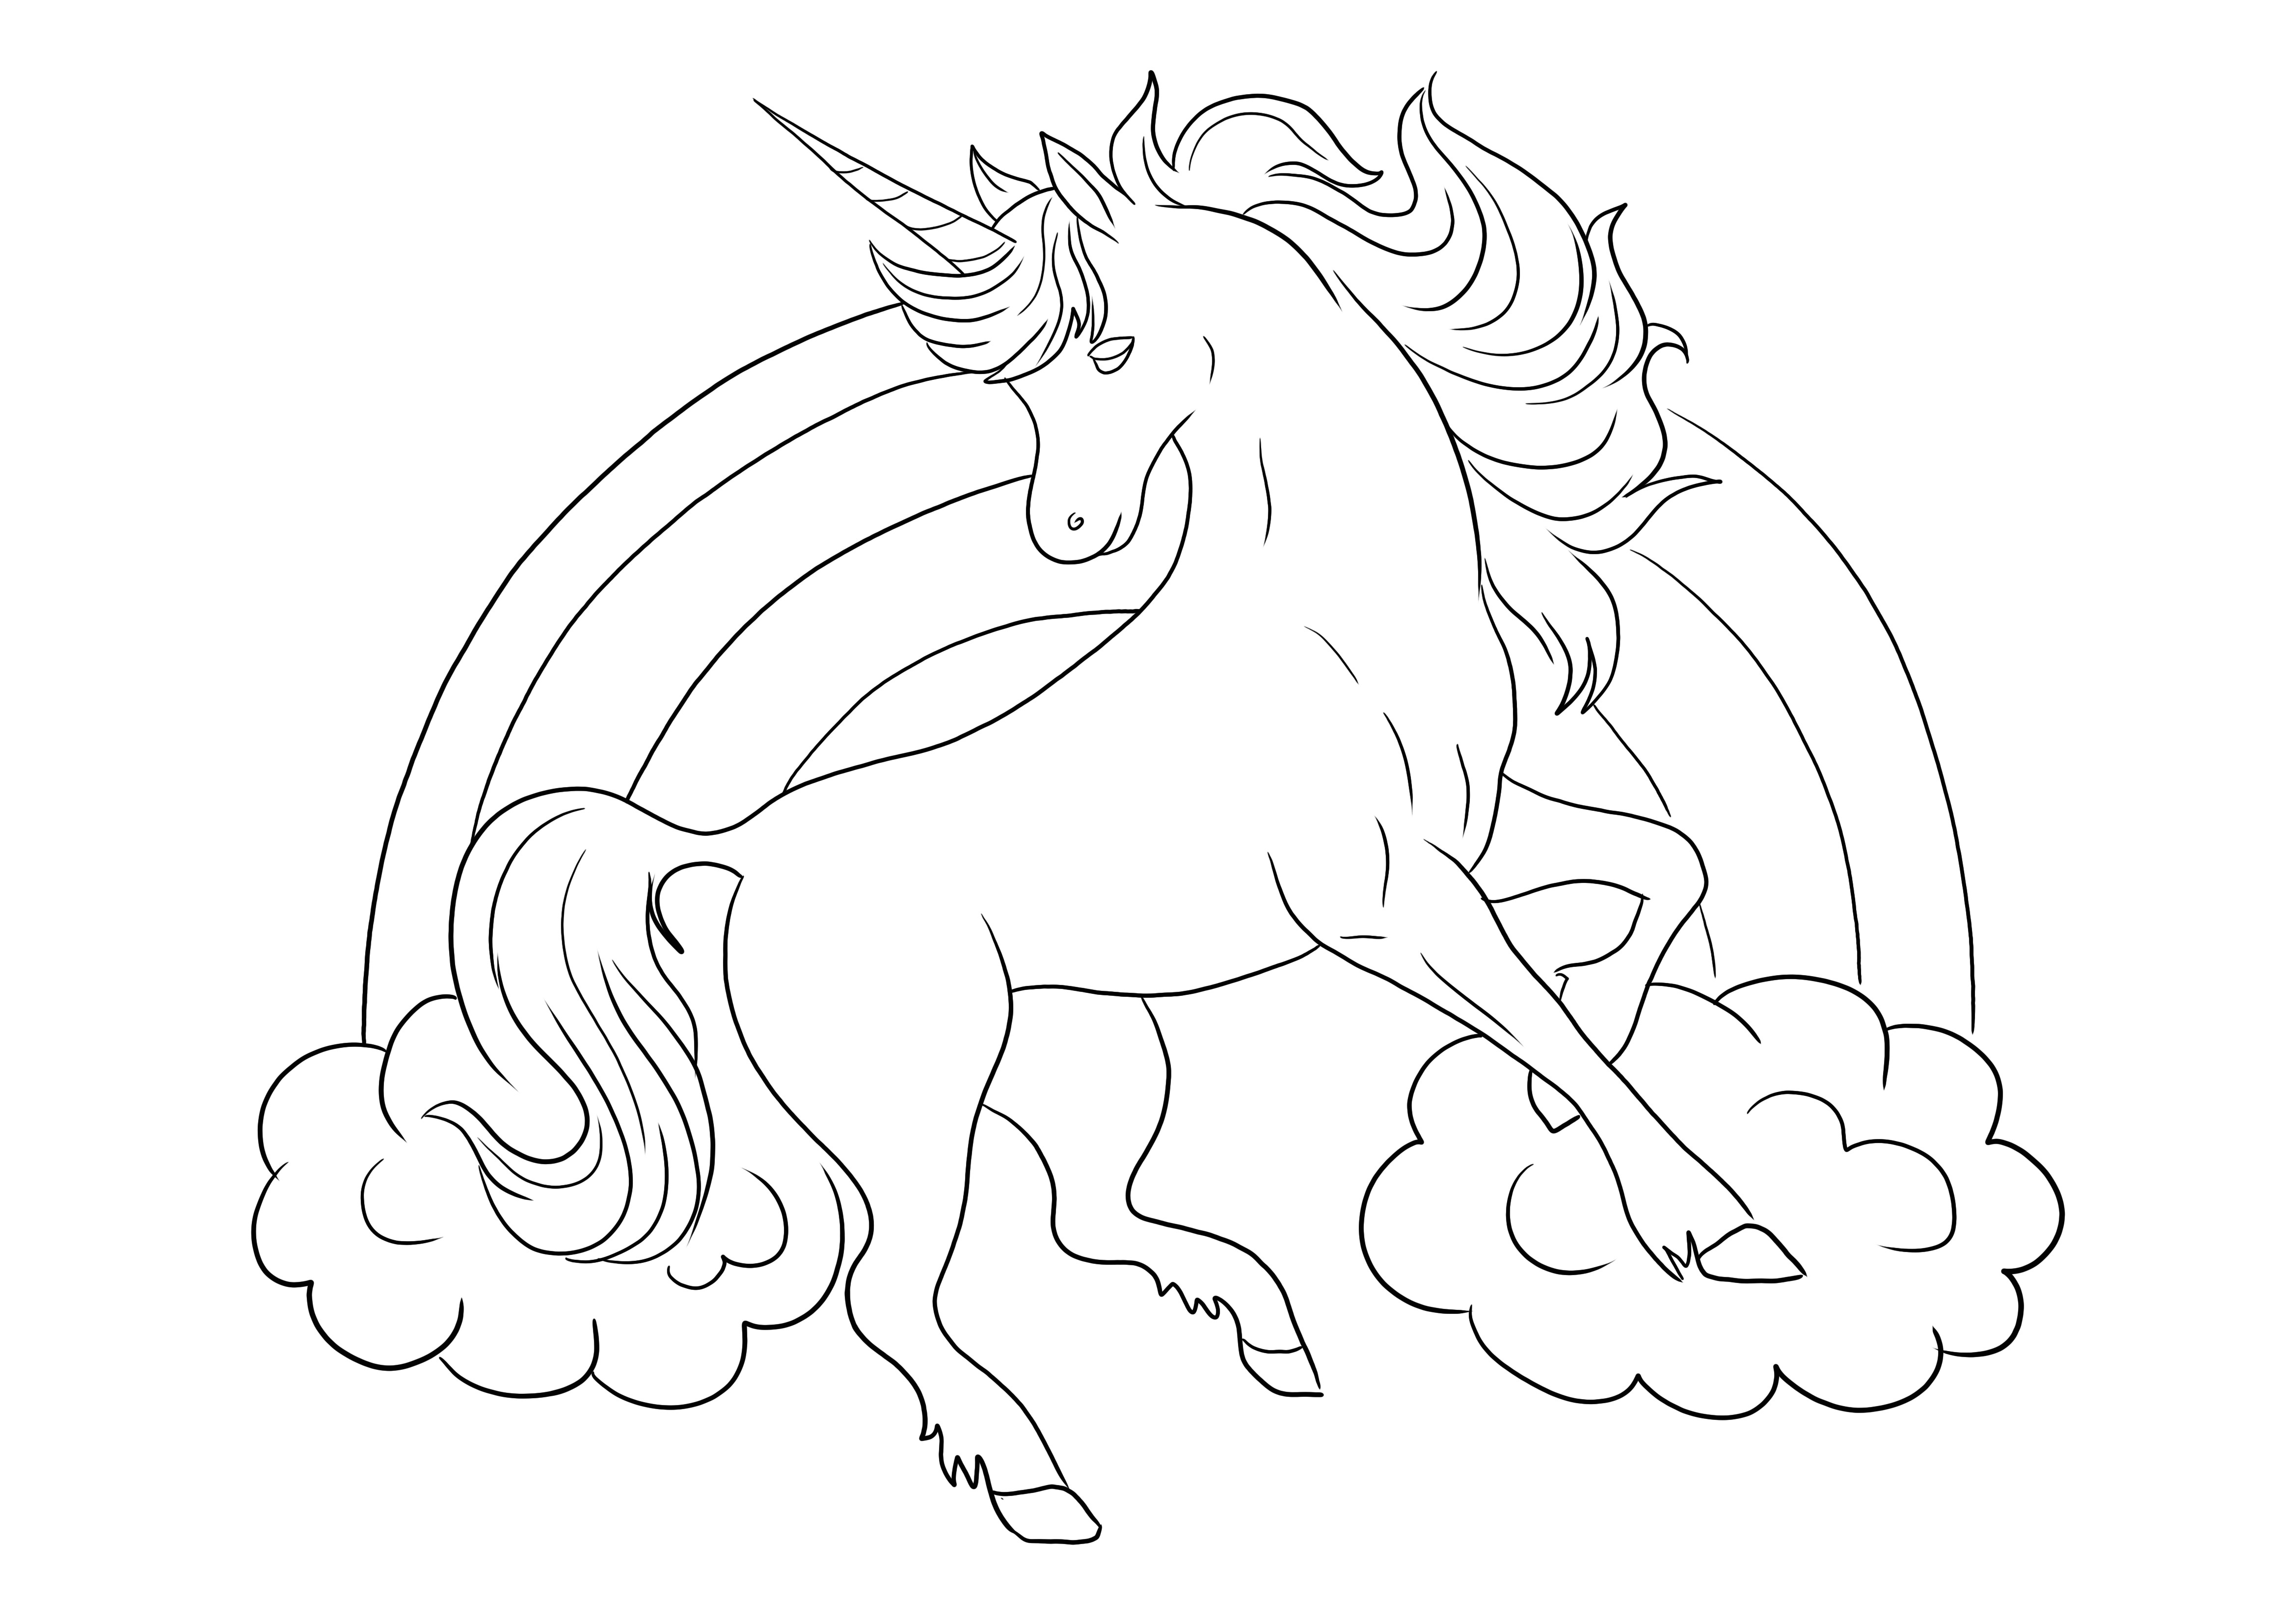 Nice unicorn for printing and easy coloring for kids of all ages